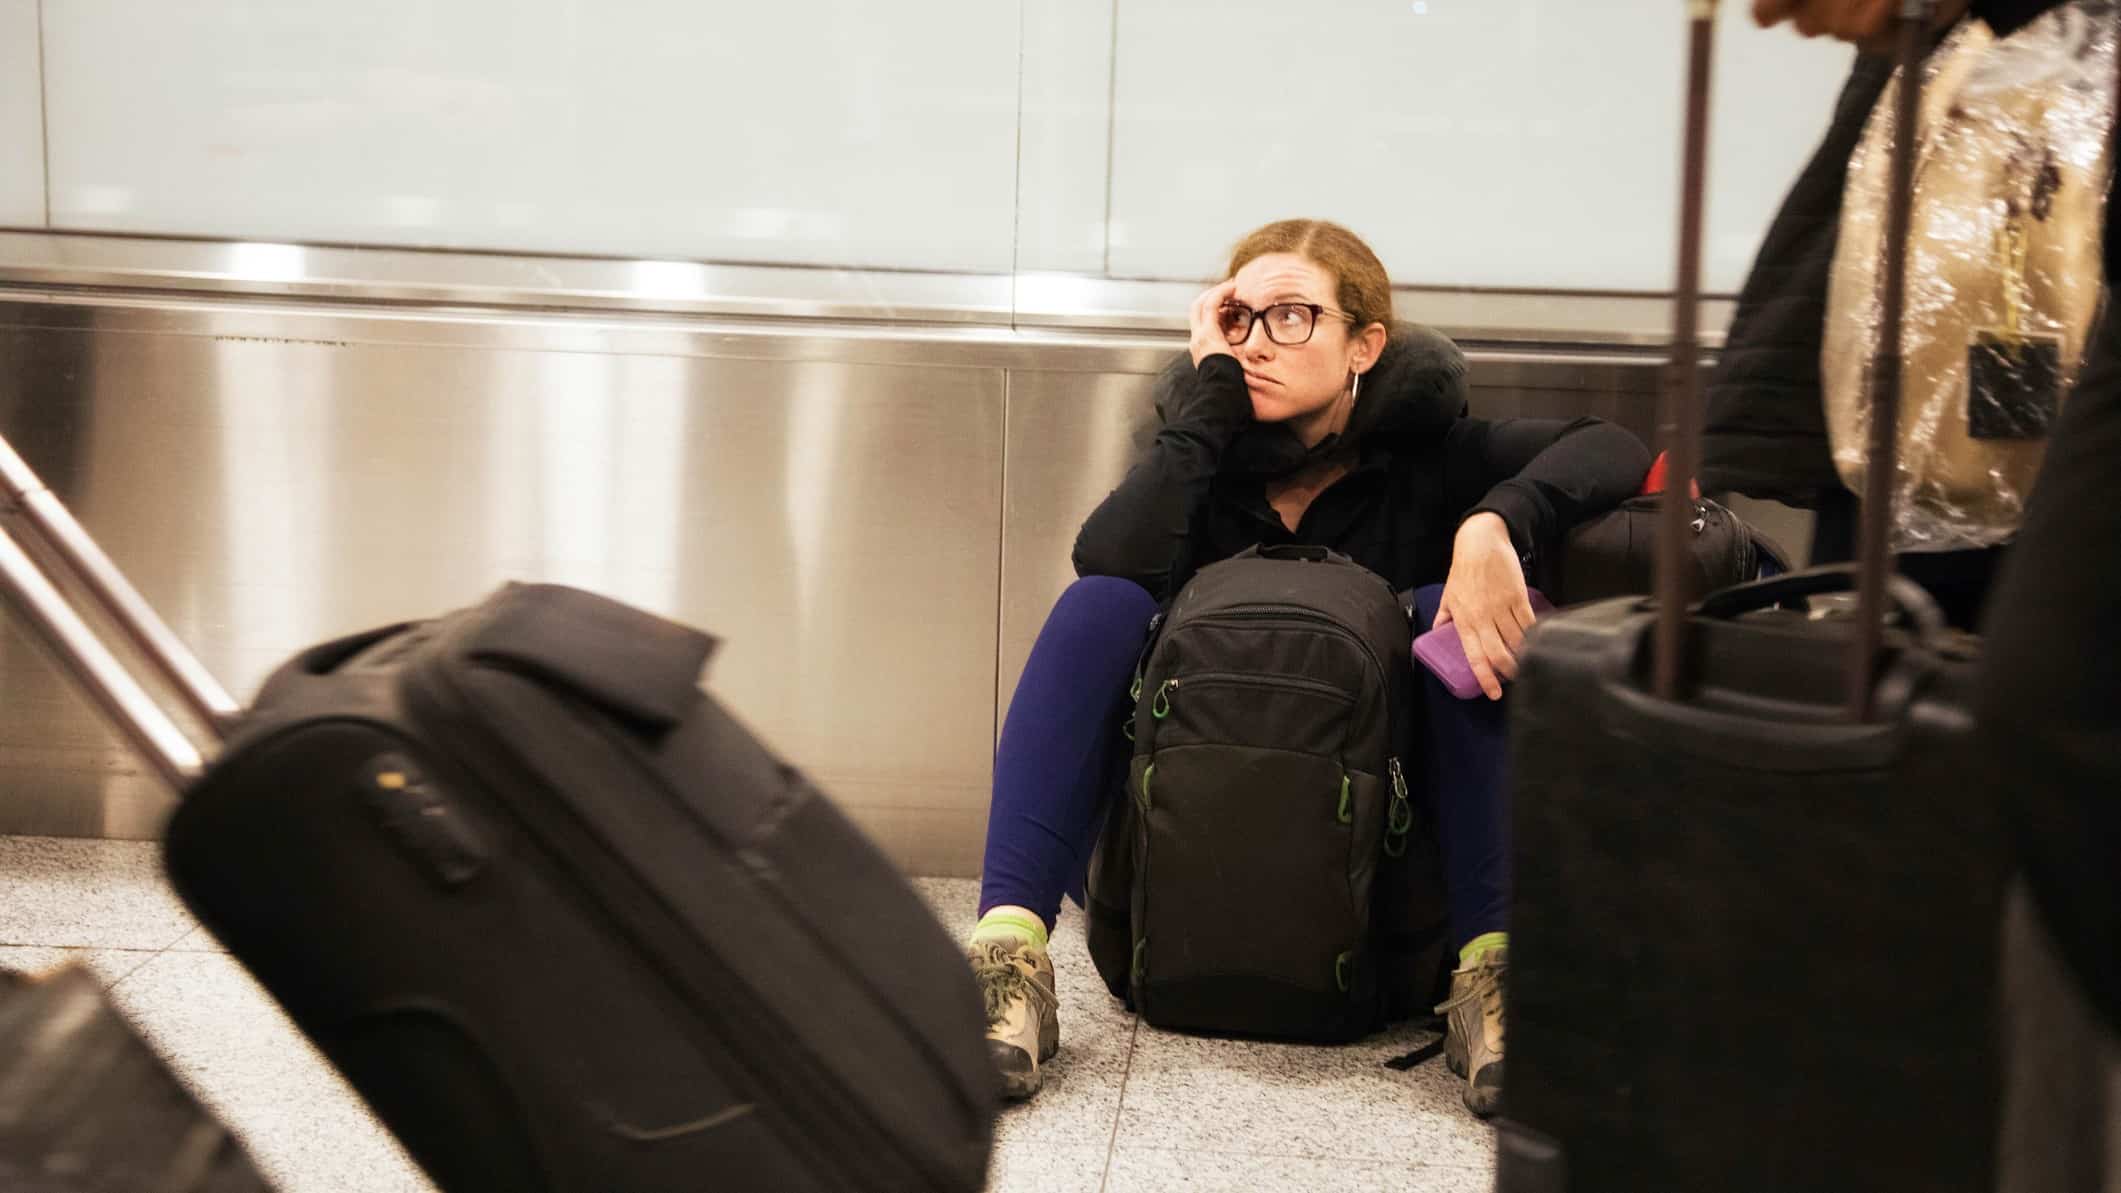 A traveller sits slumped on the floor of an airport with ehr suitcase looking fed-up as other travellers walk past.